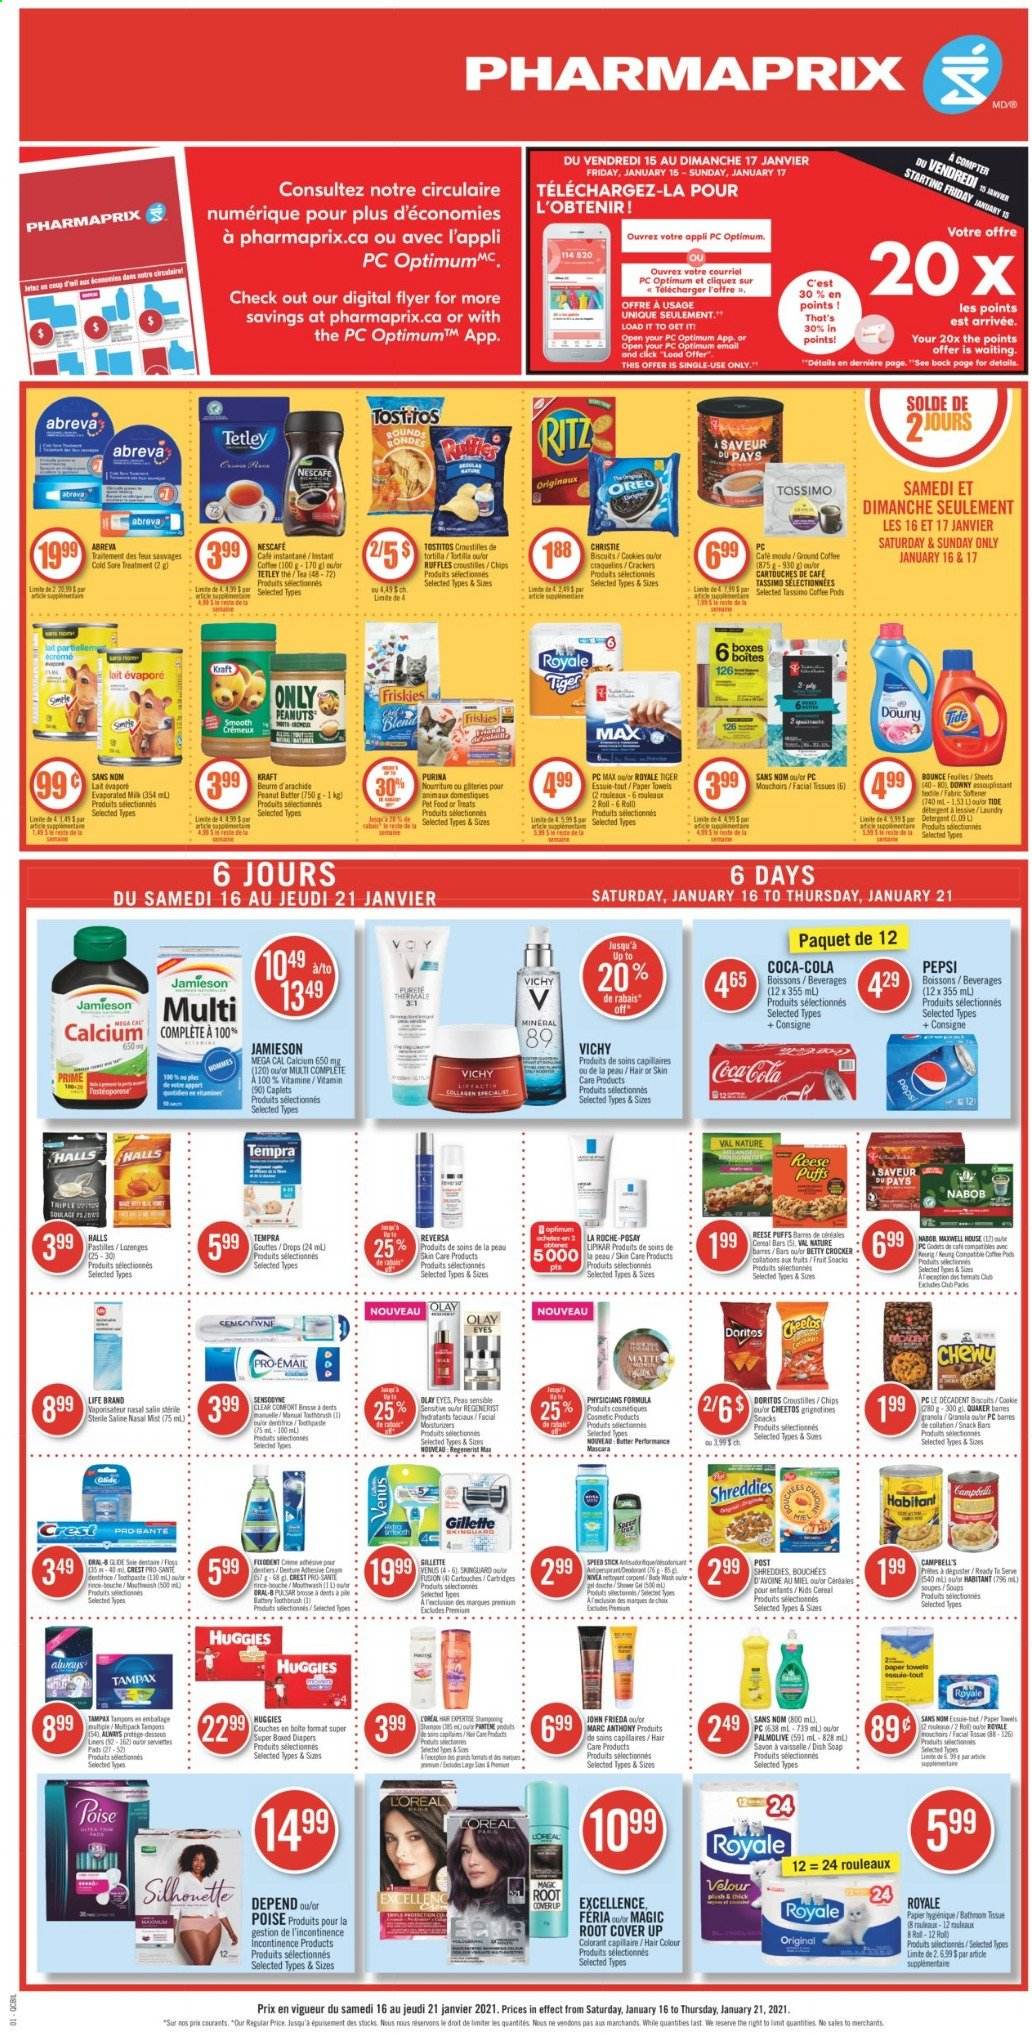 thumbnail - Pharmaprix Flyer - January 16, 2021 - January 21, 2021 - Sales products - tortillas, puffs, Quaker, Kraft®, cookies, Halls, cereal bar, crackers, biscuit, fruit snack, snack bar, RITZ, Doritos, Cheetos, Ruffles, Tostitos, cereals, rice, peanut butter, peanuts, Coca-Cola, Pepsi, tea, coffee pods, ground coffee, Keurig, nappies, tissues, kitchen towels, paper towels, Tide, fabric softener, Bounce, shower gel, Vichy, Palmolive, soap, mouthwash, Crest, Abreva, L’Oréal, La Roche-Posay, moisturizer, Olay, hair color, John Frieda, Venus, cup, battery, Oreo, Gillette, granola, Tampax, Huggies, Pantene, Nivea, Oral-B, chips, Sensodyne, Nescafé. Page 1.